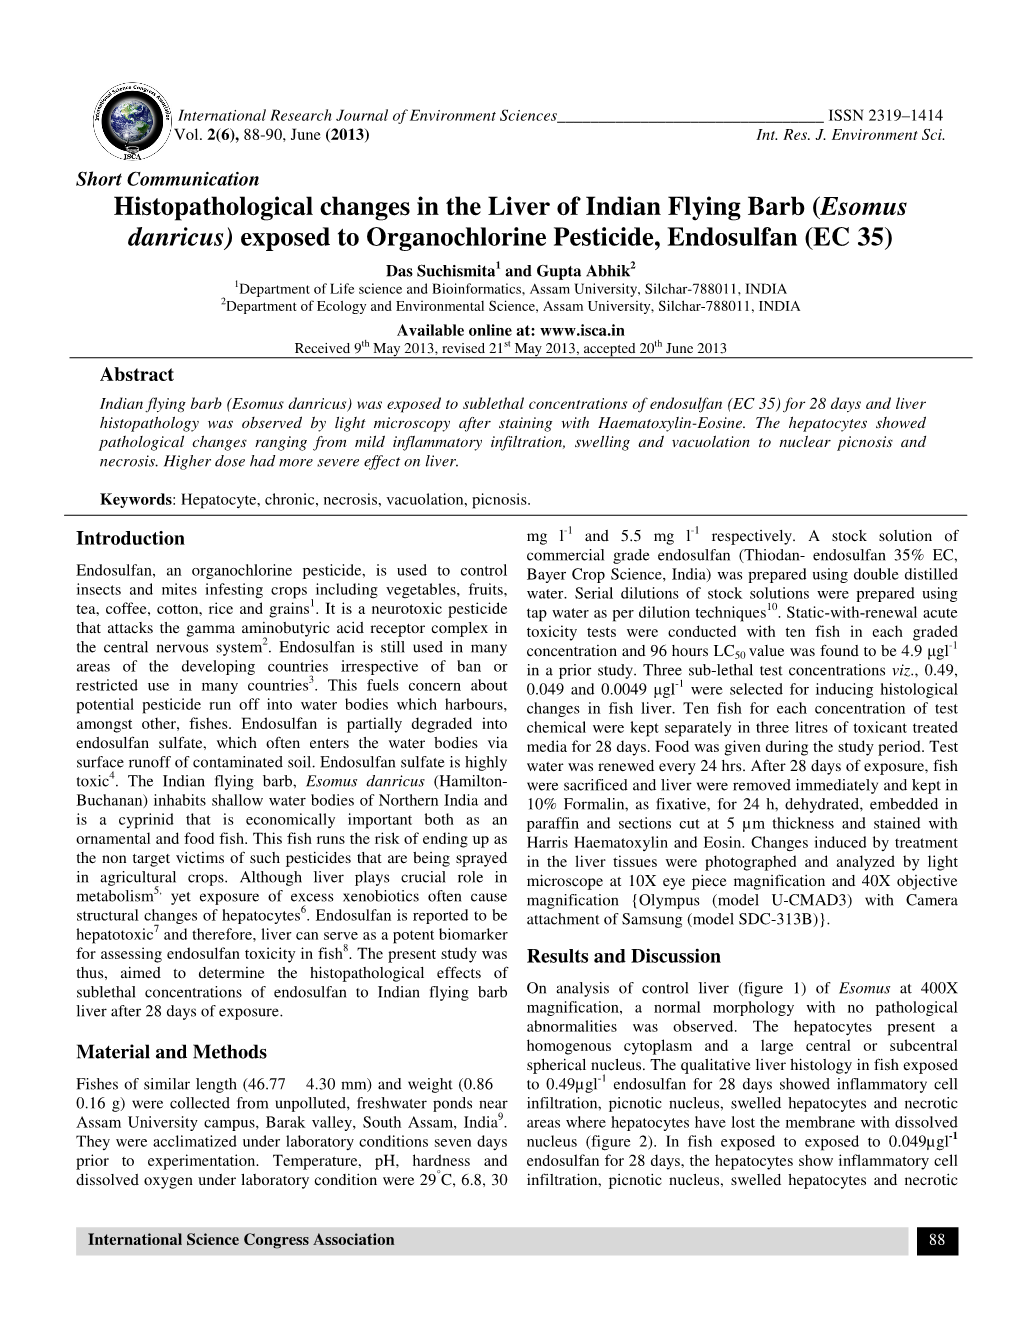 Histopathological Changes in the Liver of Indian Flying Barb (Esomus Danricus) Exposed to Organochlorine Pesticide, Endosulfan (EC 35)